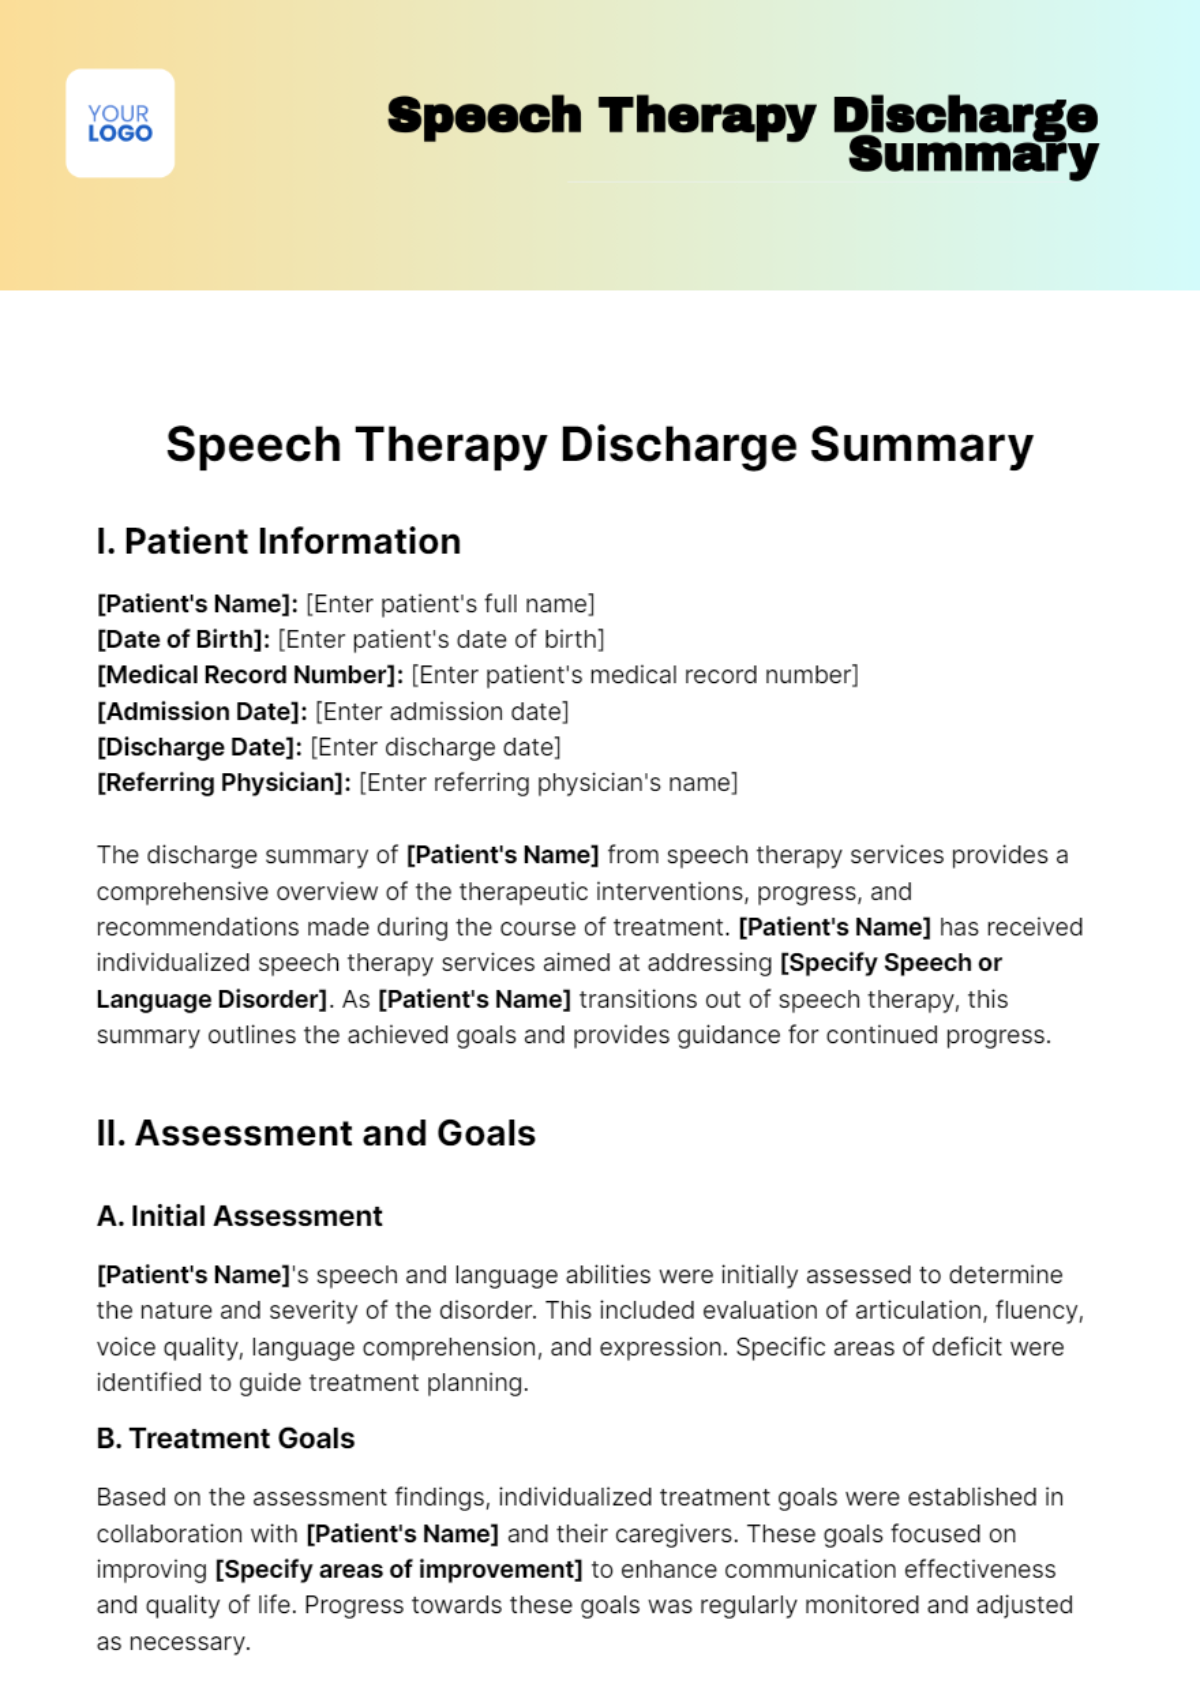 Speech Therapy Discharge Summary Template